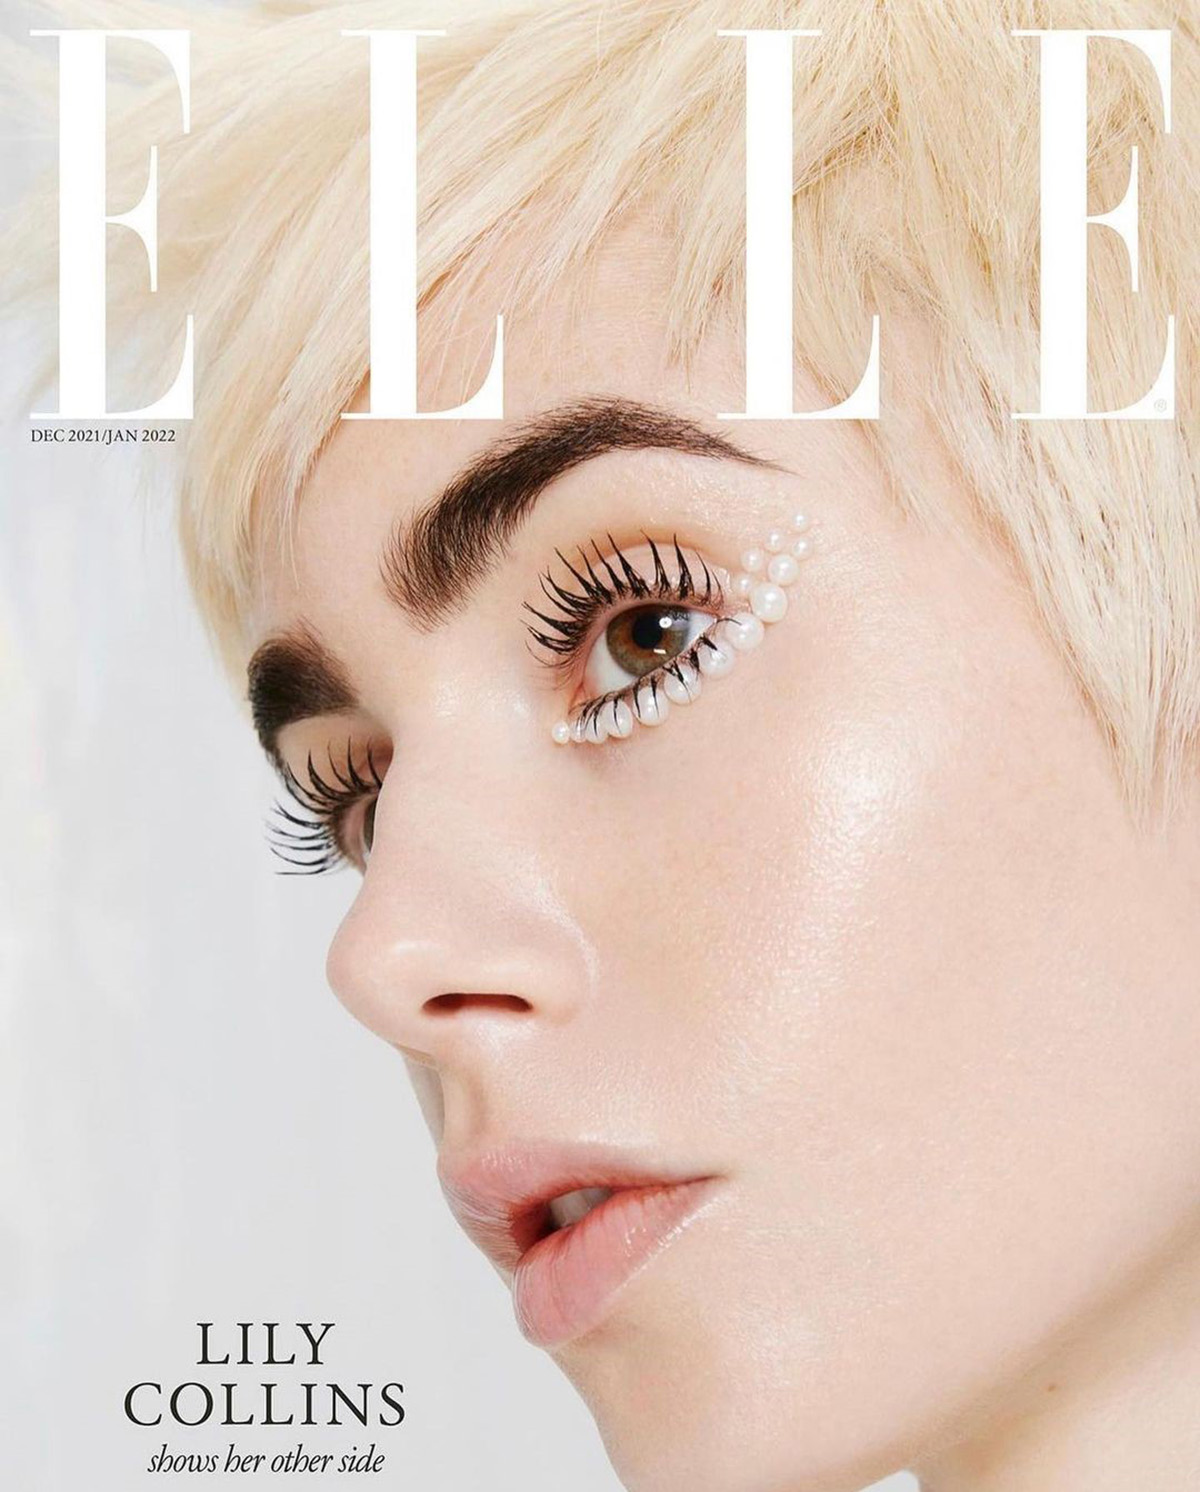 Lily Collins covers Elle UK December 2021 January 2022 by Danny Kasirye